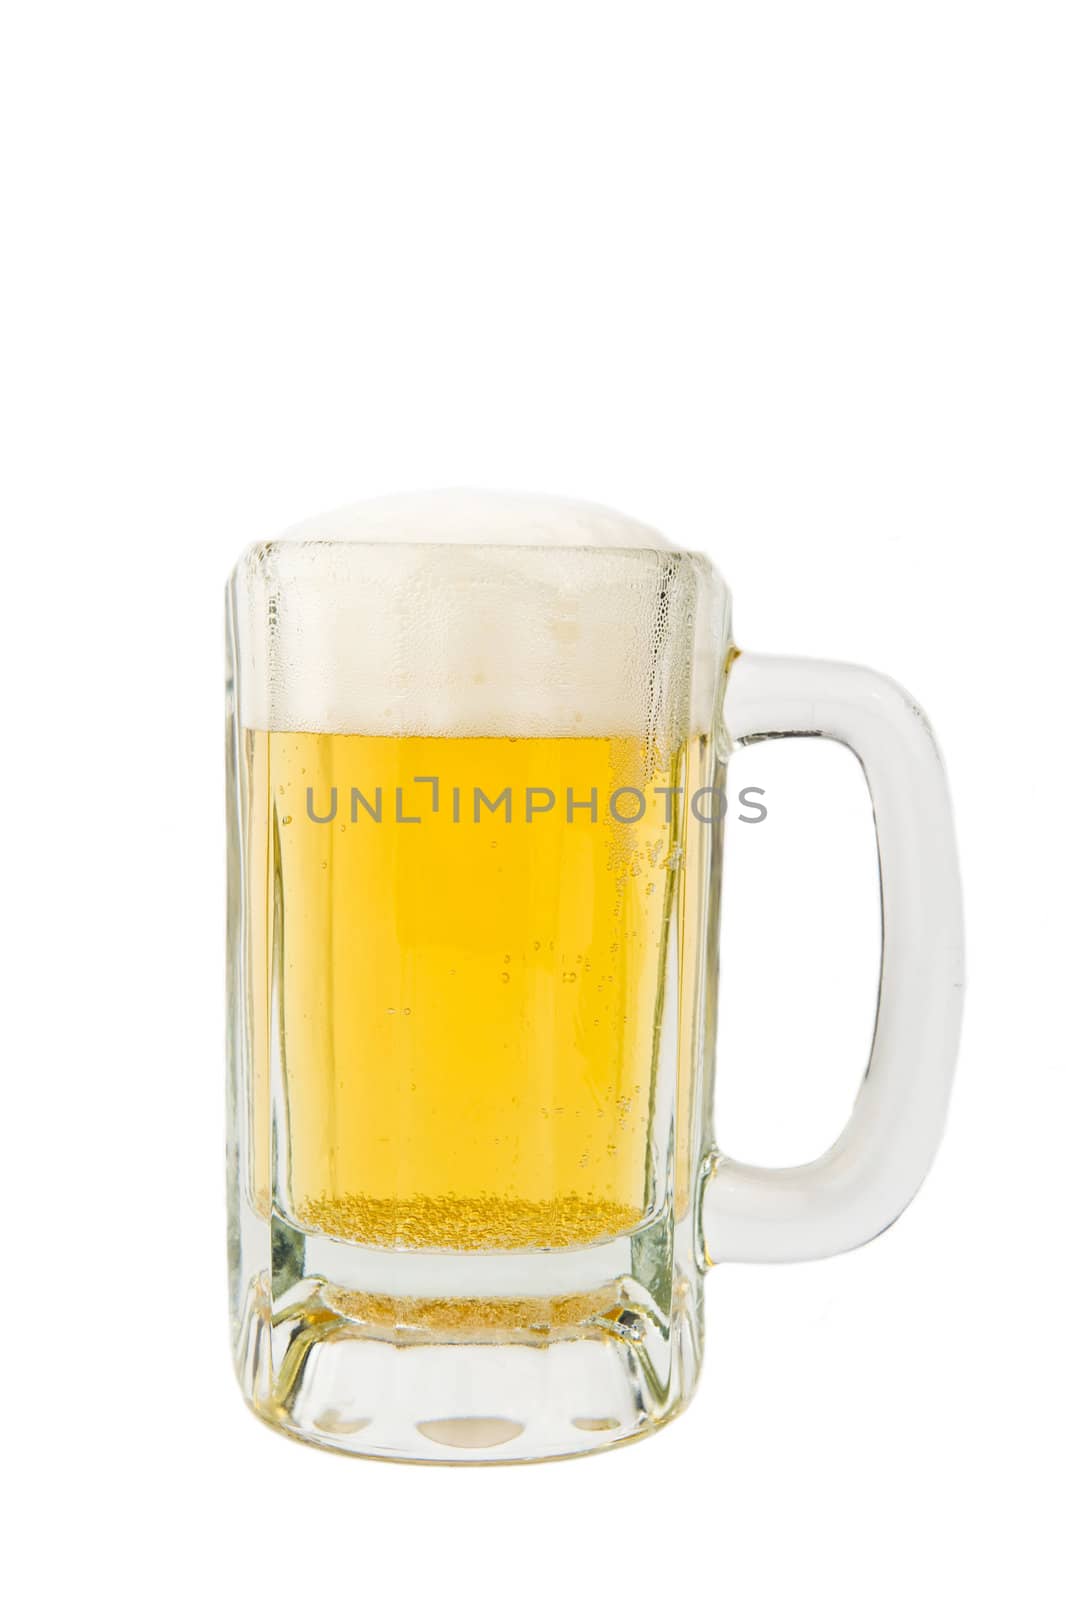 Image of a mug of beer on white background